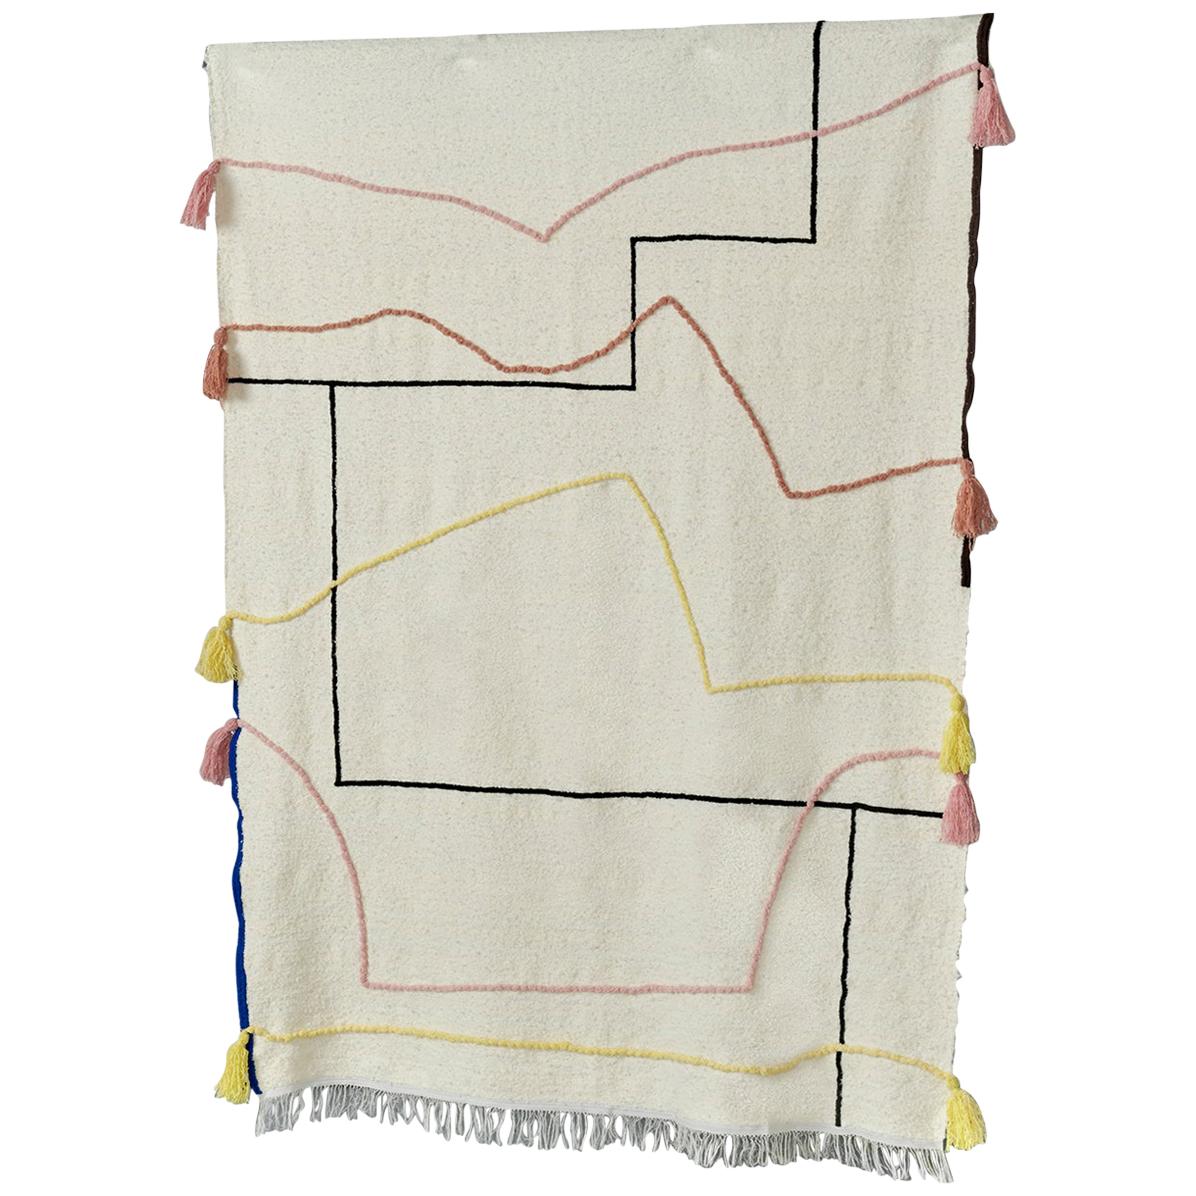 Entwine Hand Knotted Wool Plaid by Maria Jeglinska, Limited Edition